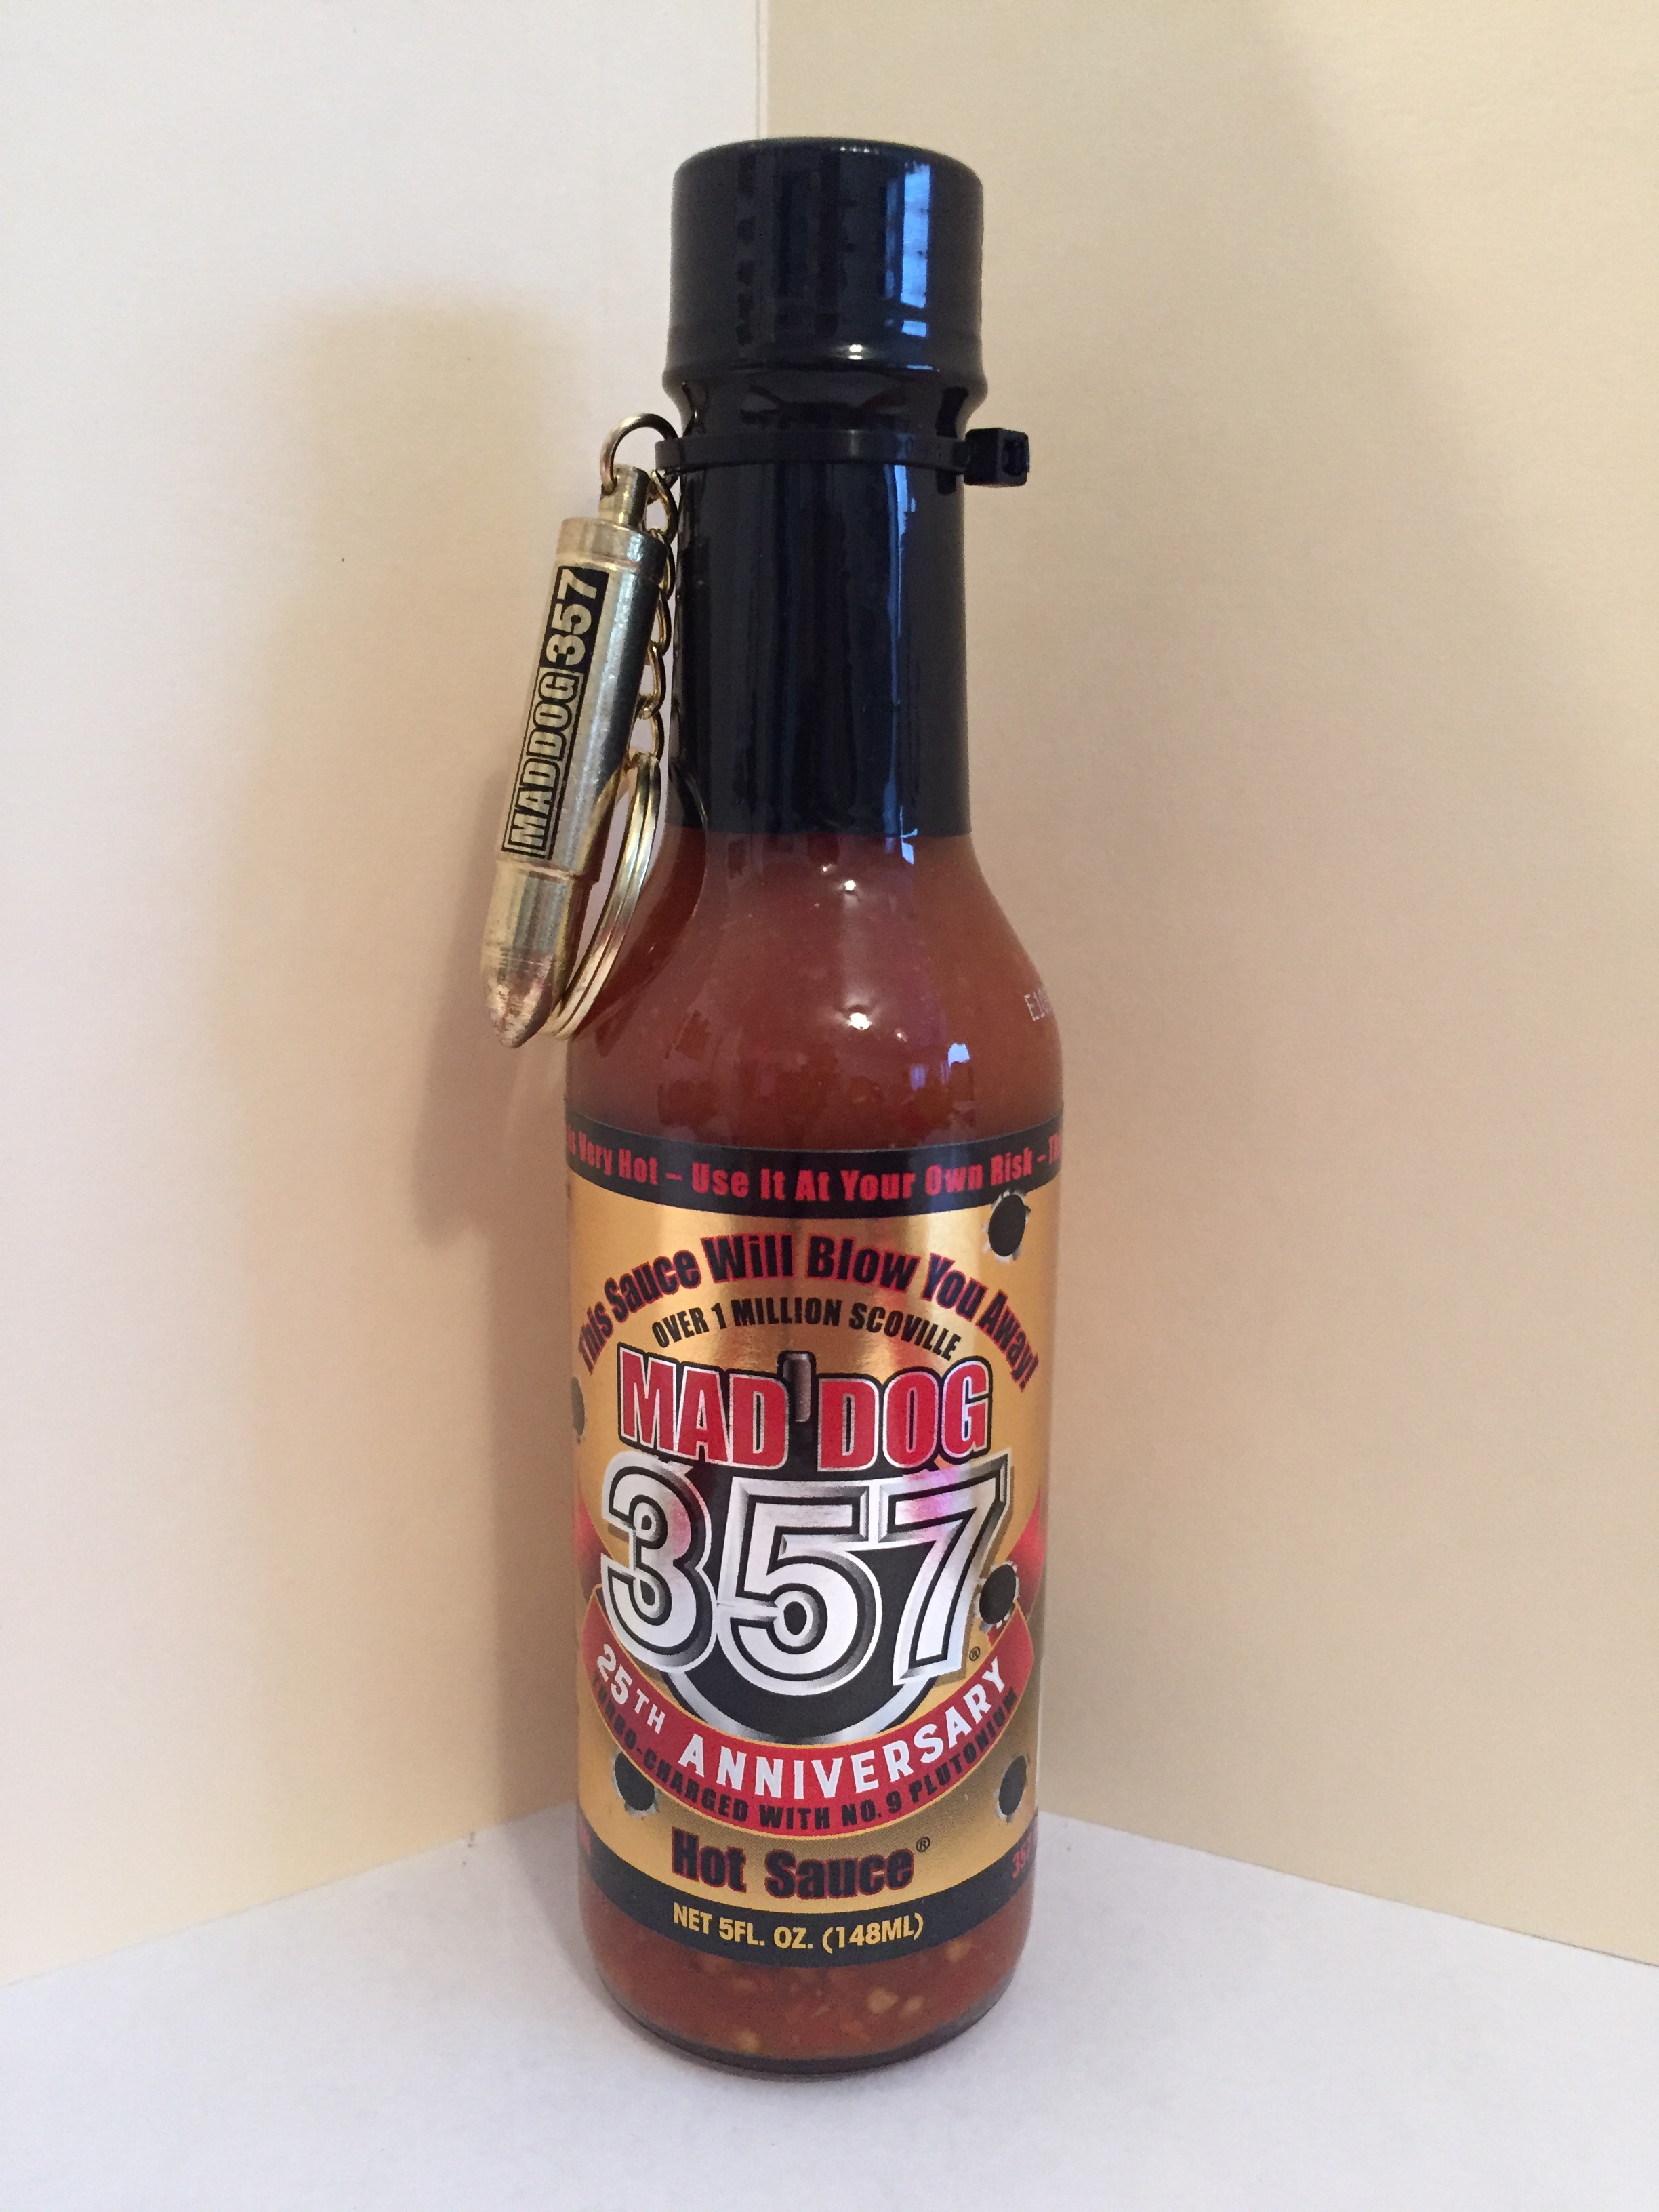 Mad Dog 357 Limited Edition Gold 25th Anniversary Hot Sauce Scorched Lizard Sauces